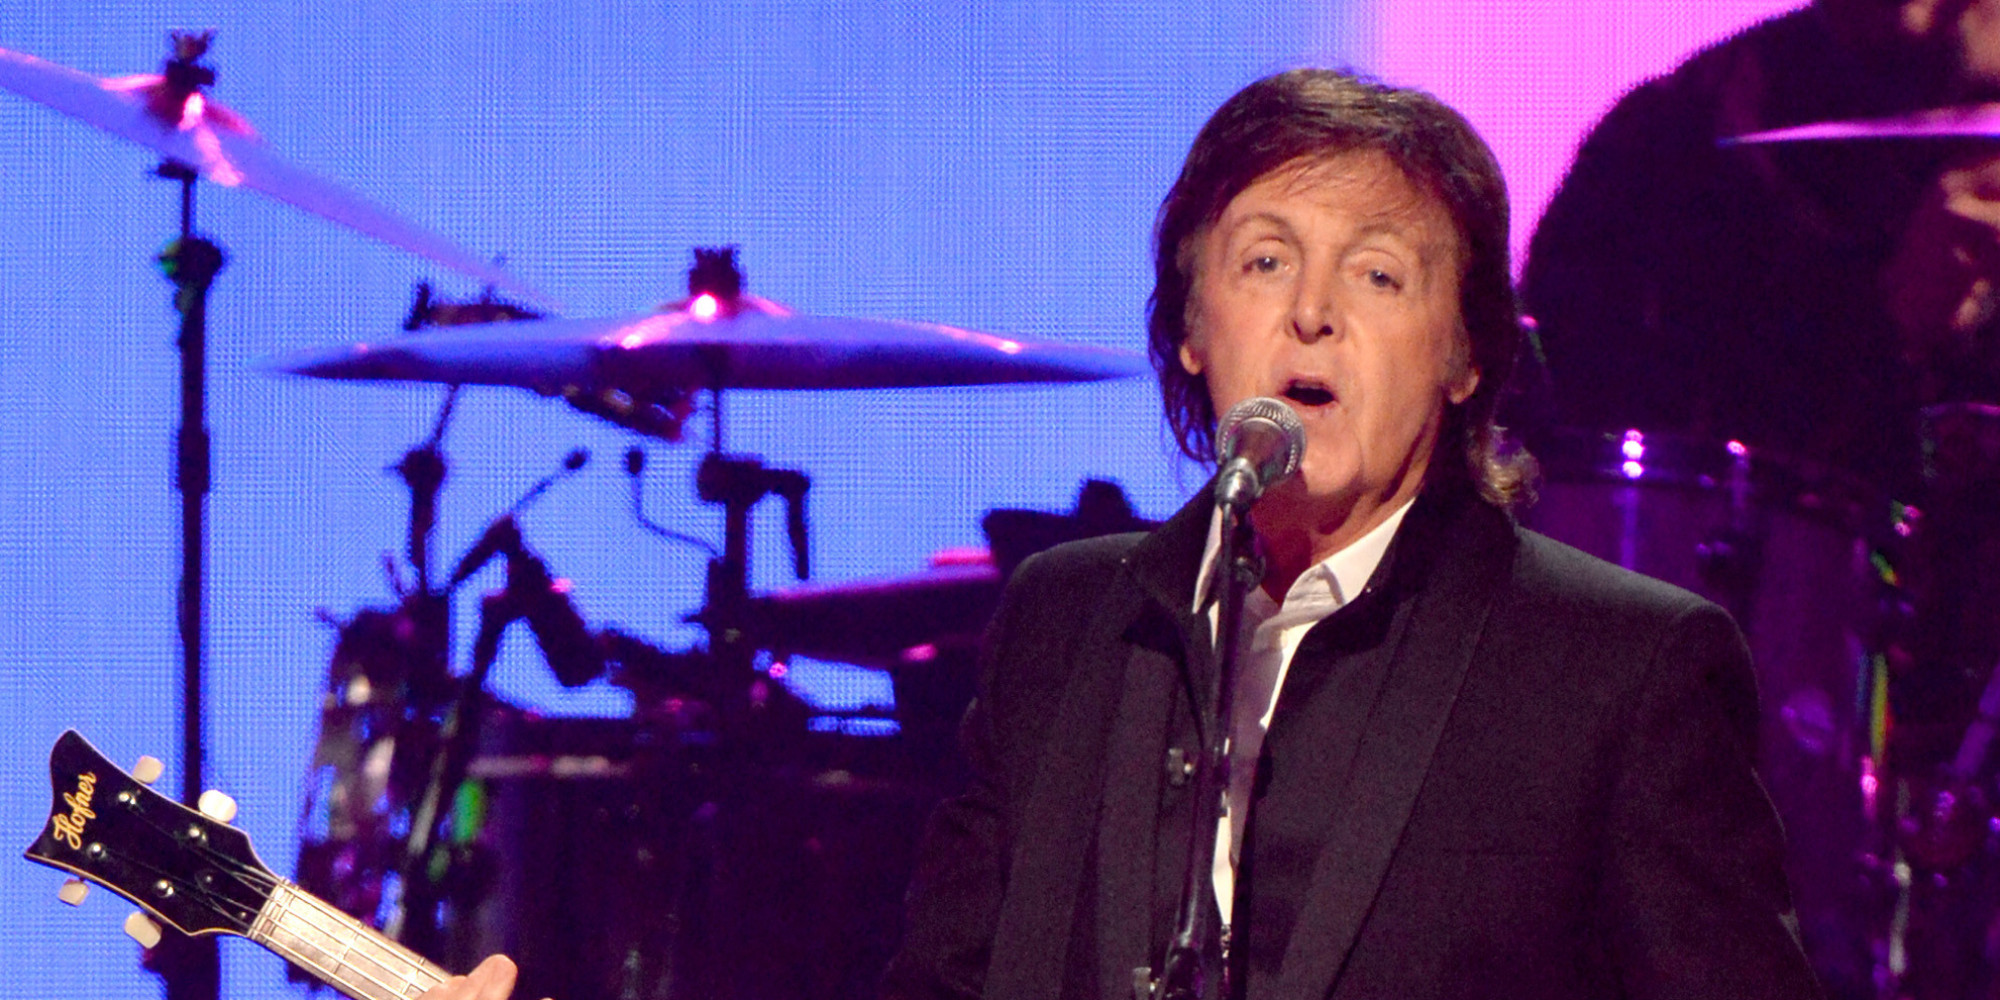 Paul McCartney's 'New' Album Previewed At iHeartRadio Music Festival